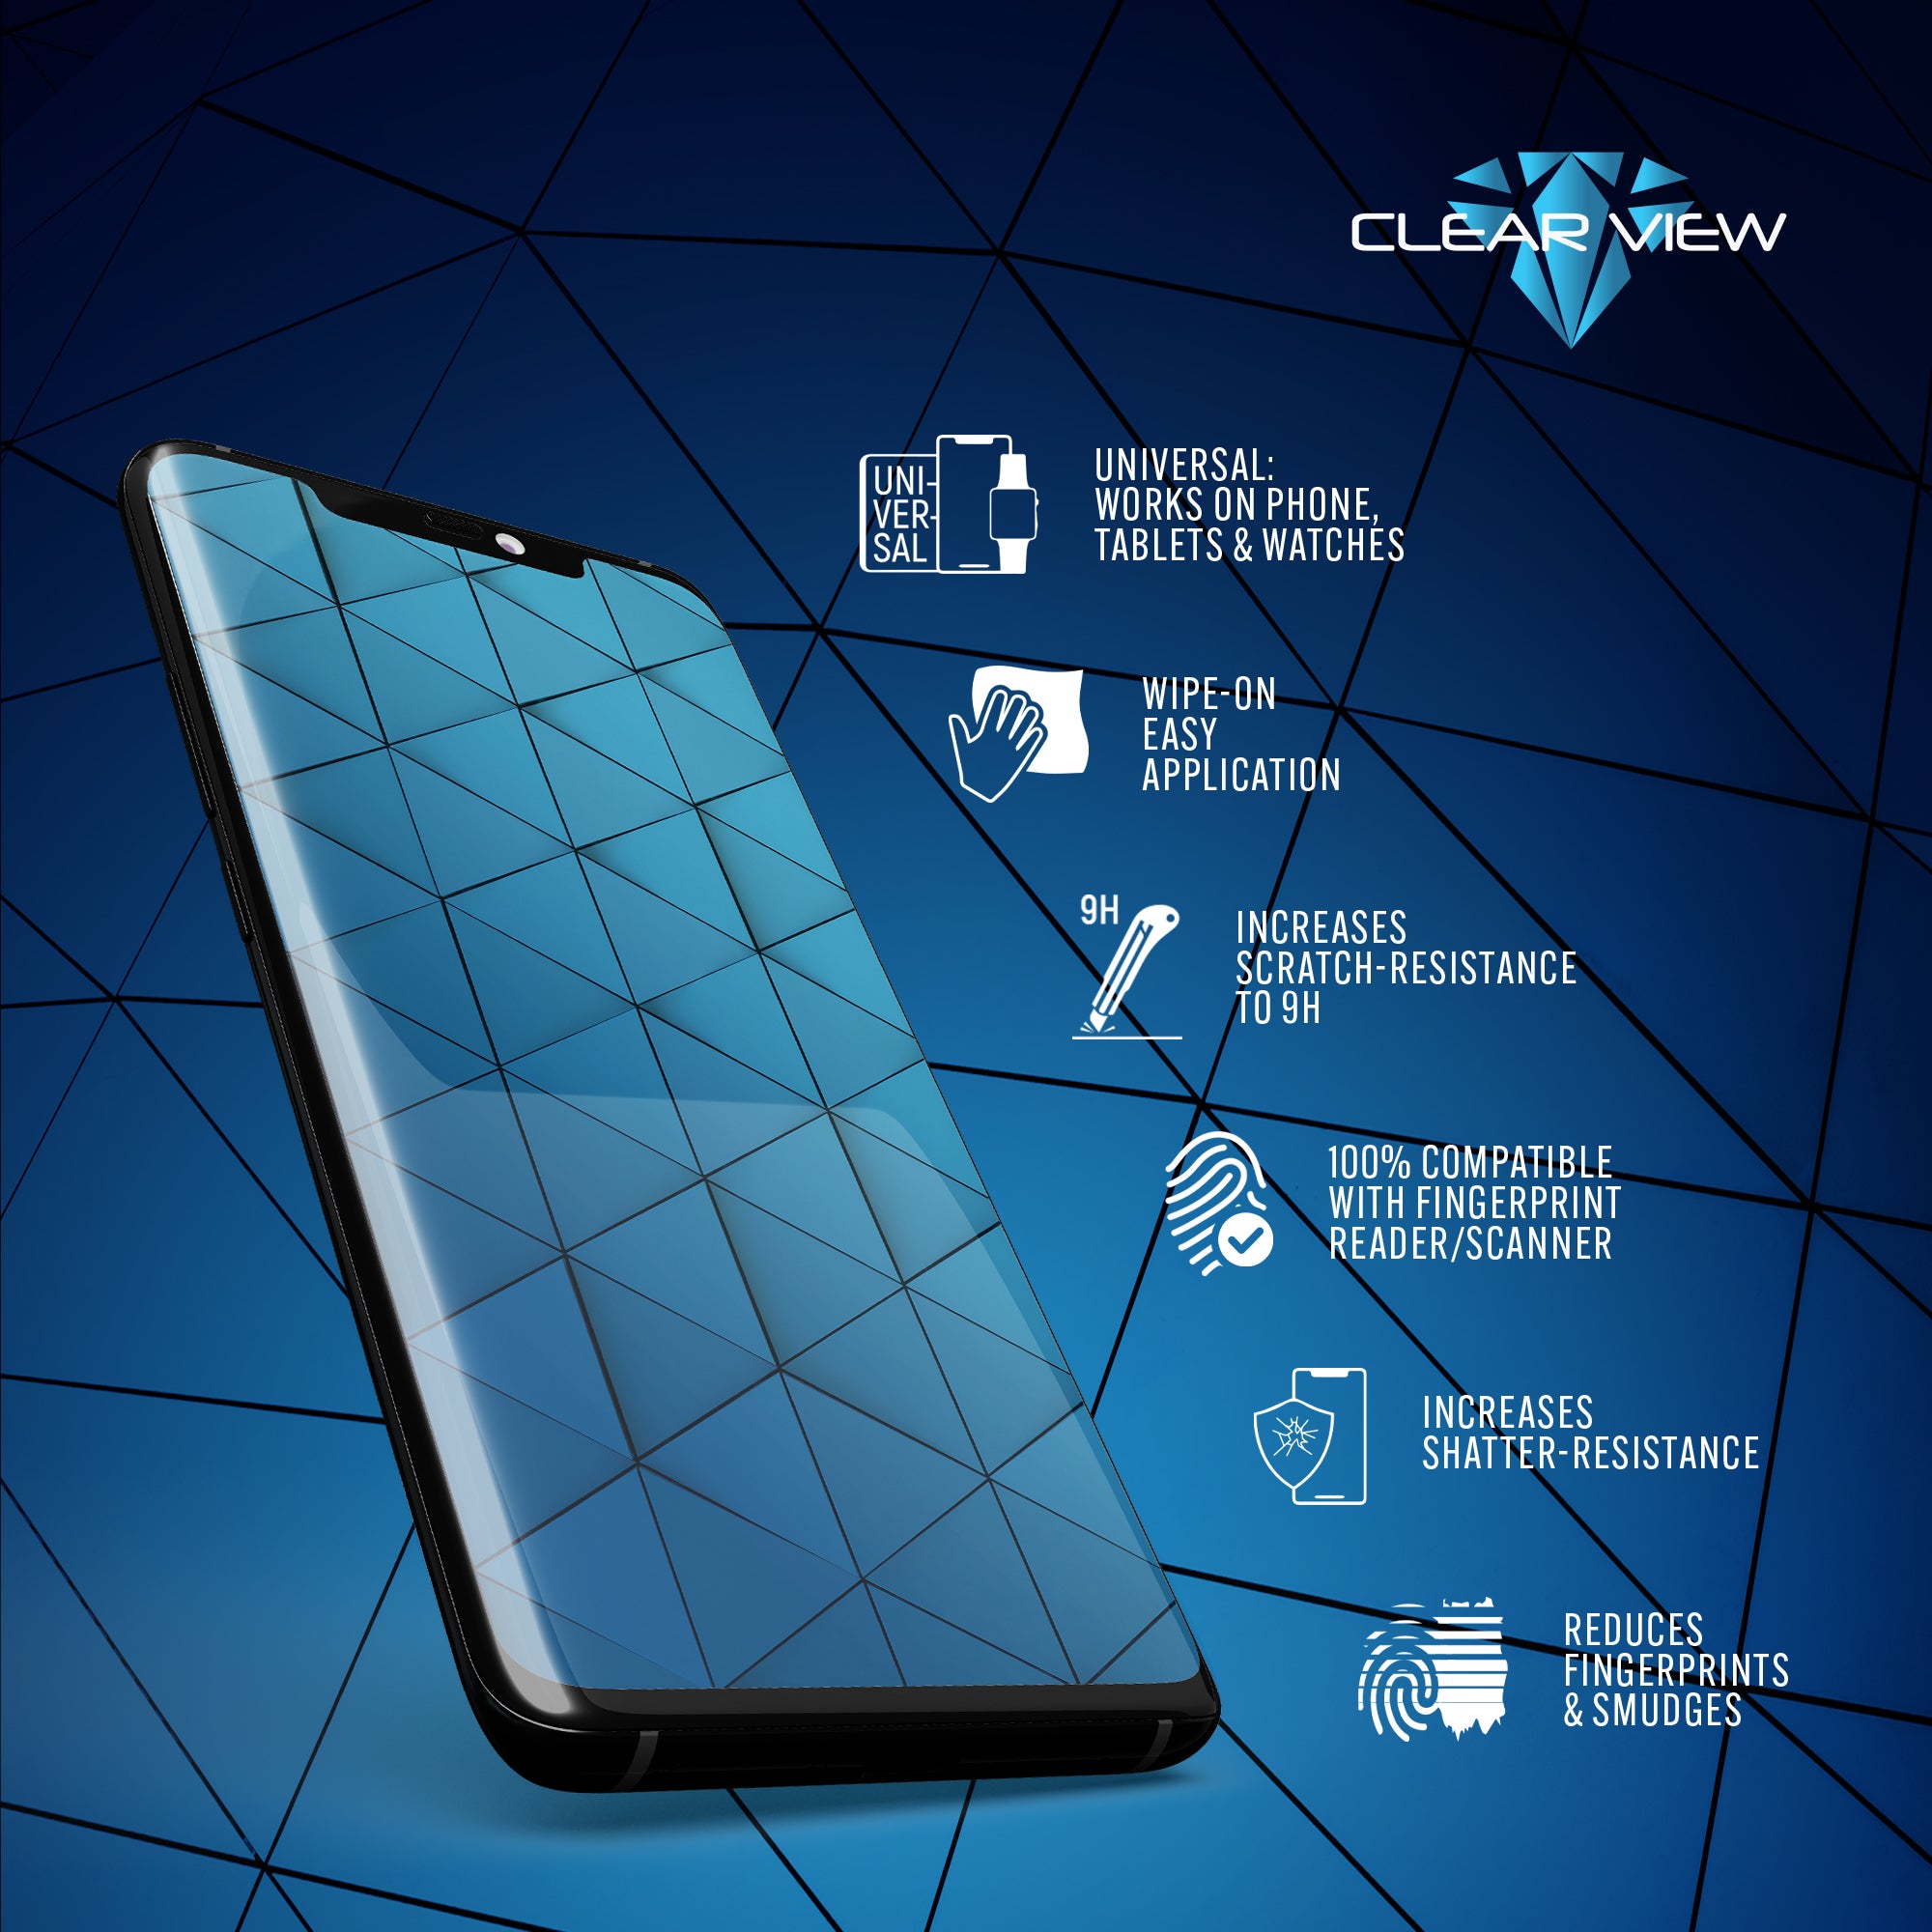 ClearView Liquid Glass Screen Protector for All Smartphones Tablets and Watches